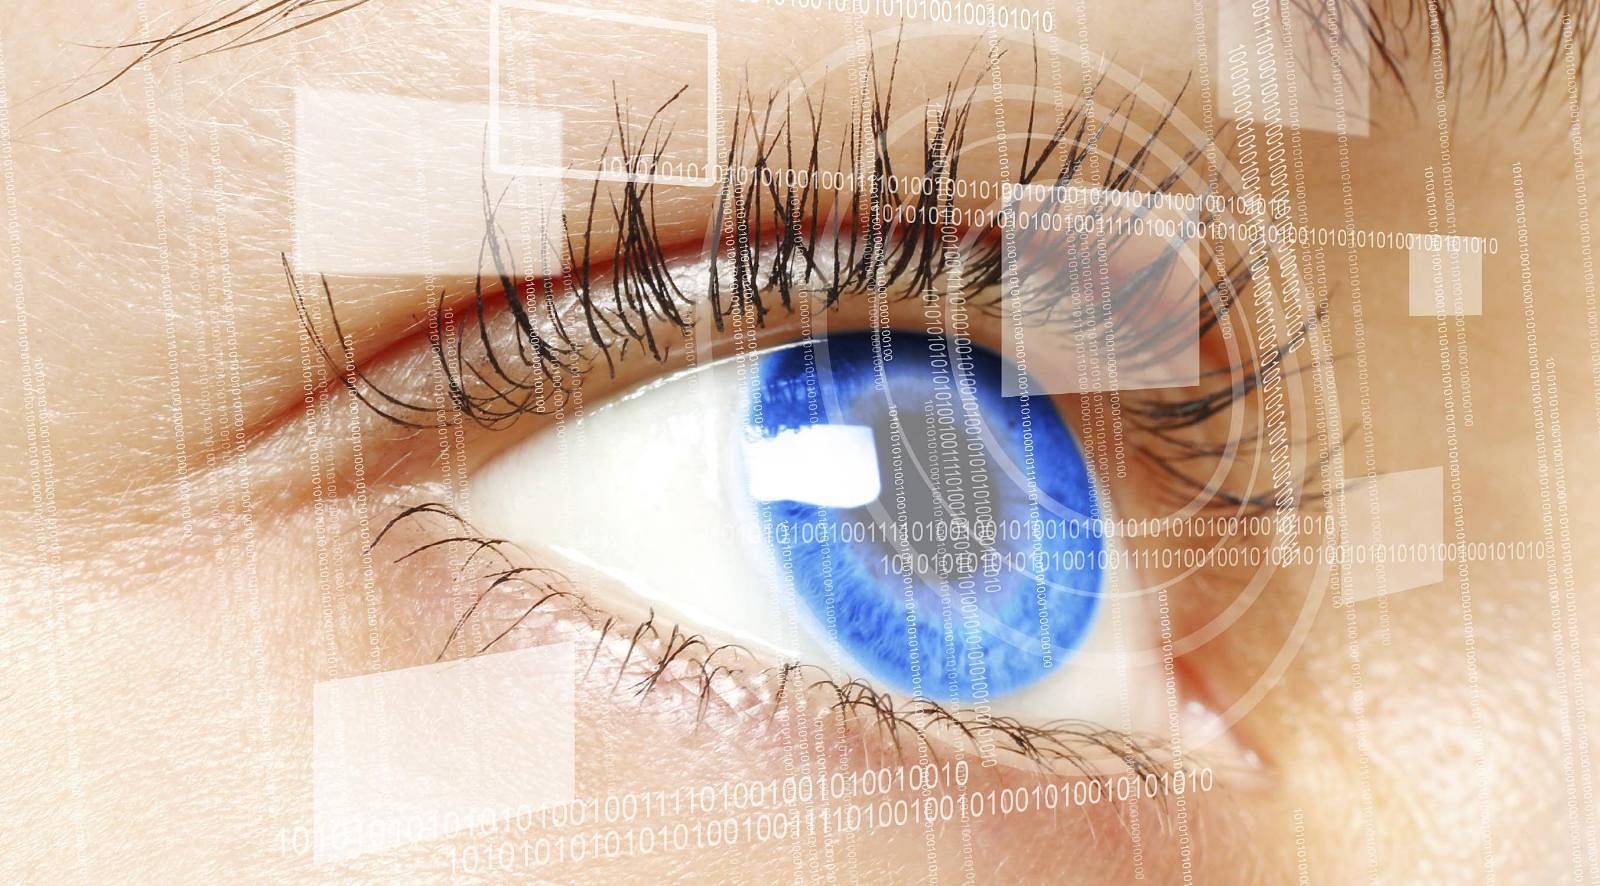 If your screen time is more than 9 hours a day, you’re in for some serious eye issues (Photo: iStock)